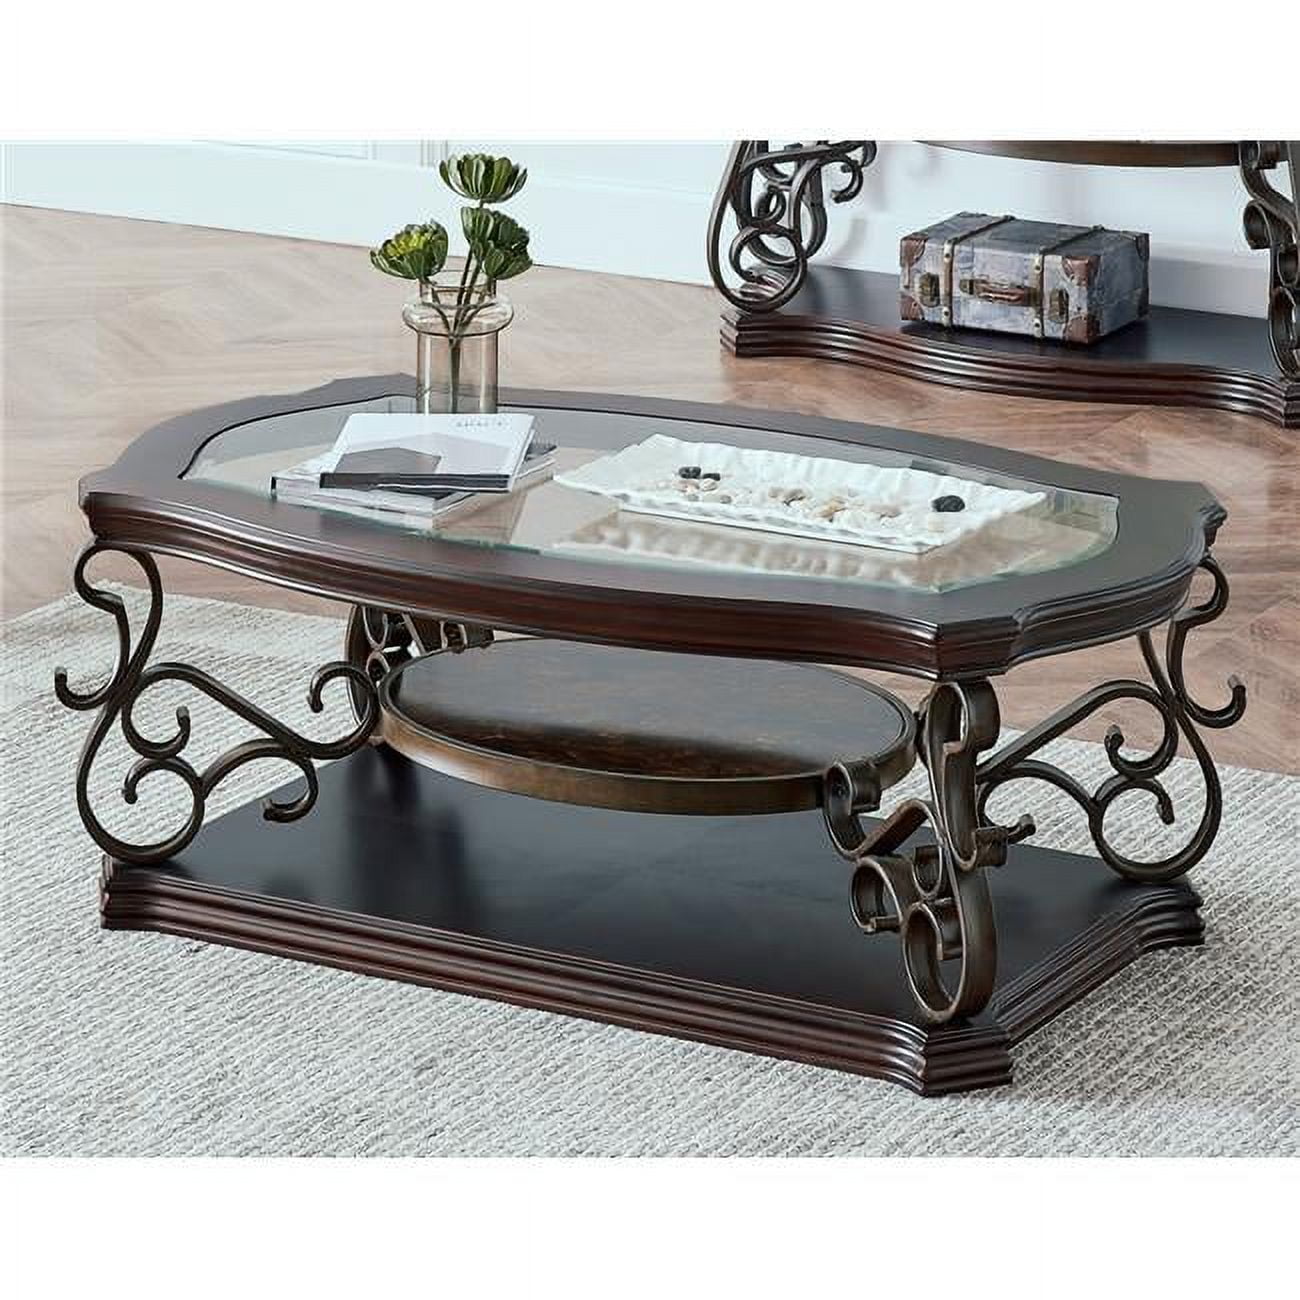 UBS-W48720760 52 x 32 x 20.3 in. Glass Table Top Cocktail Table with Marble Paper Middle Shelf & Powder Coat Finish Metal Legs, Dark Brown -  Direct Wicker